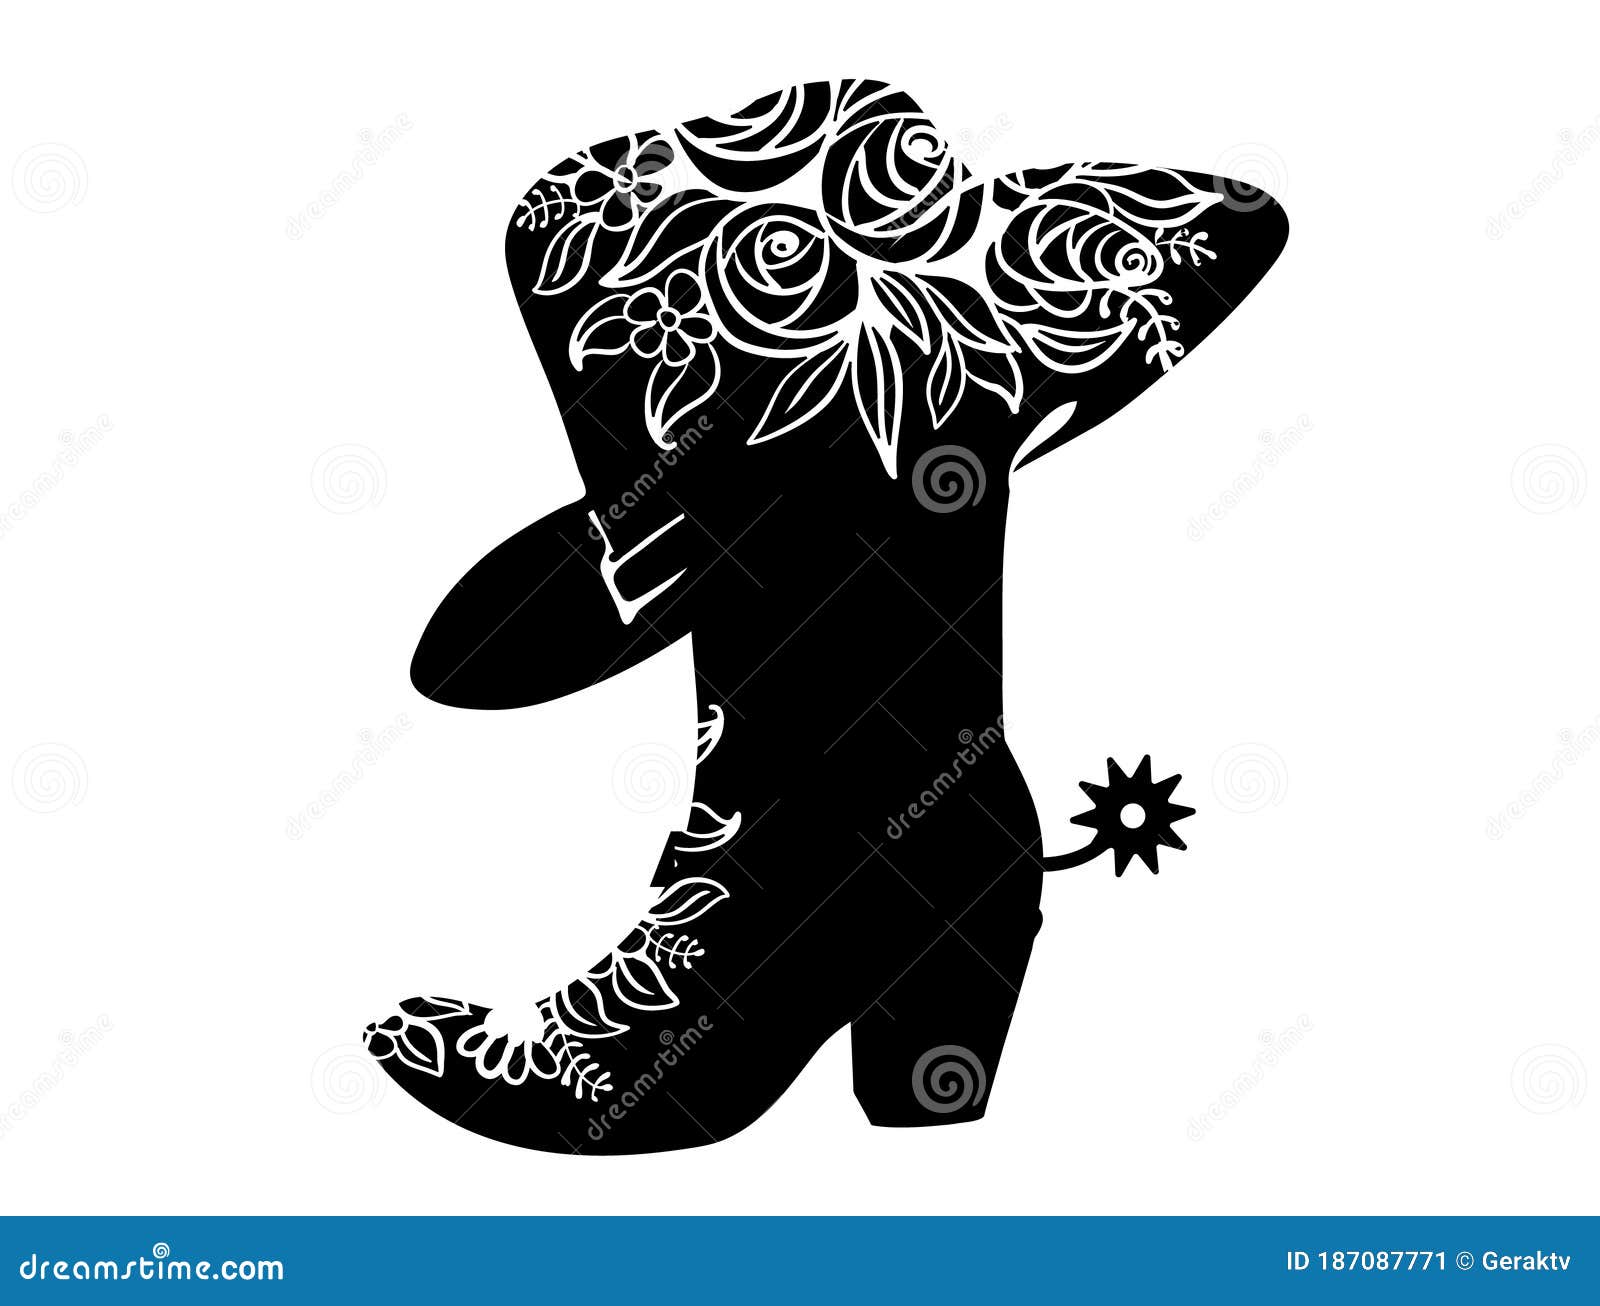 cowboy boot black silhouette for text or decoration.  cowgirl party printable   on white. western boot